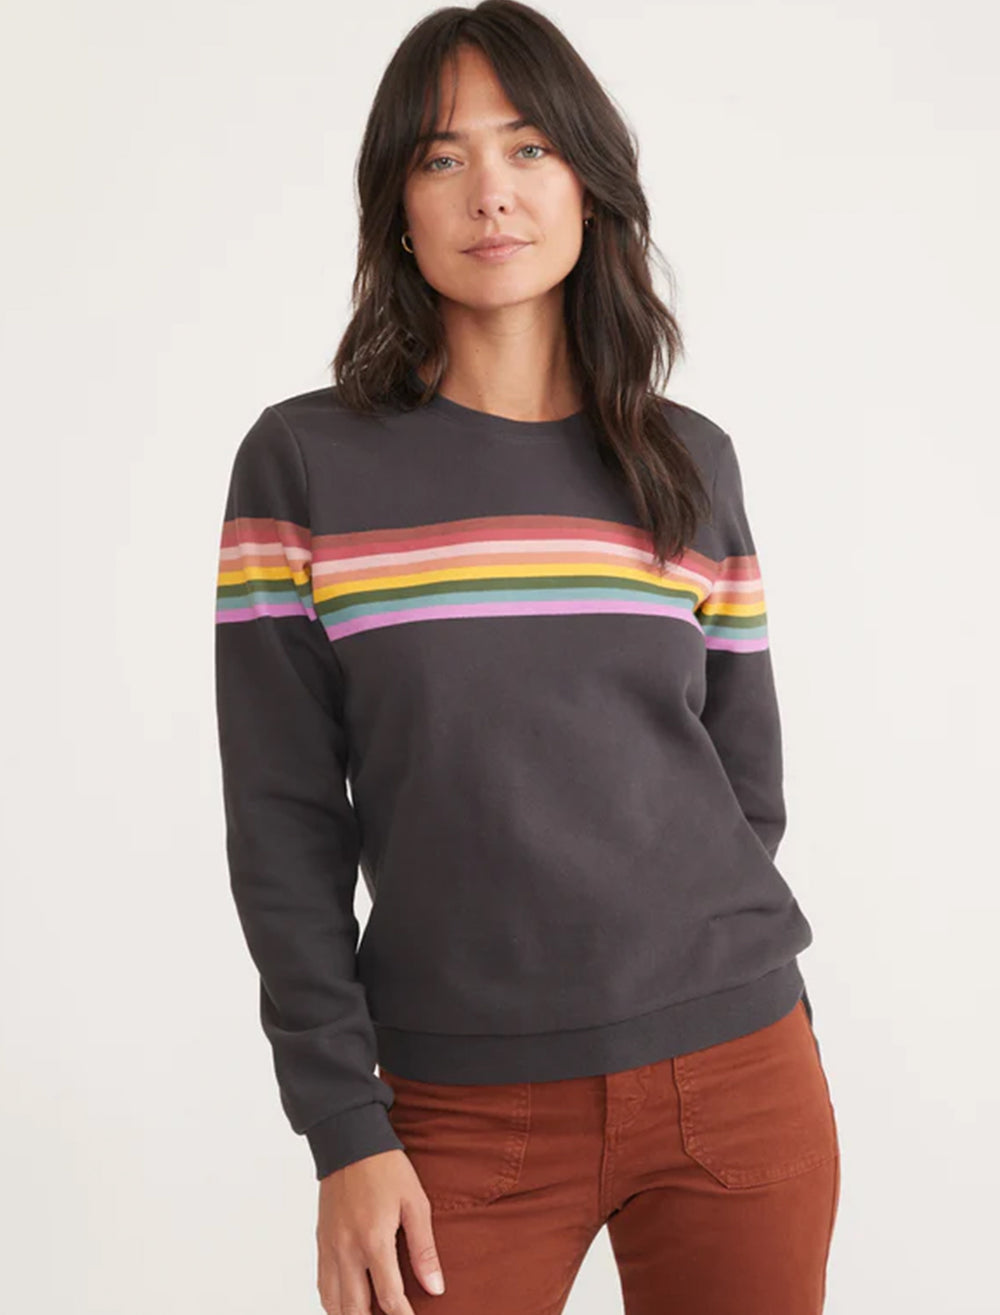 Model wearing Marine Layer's anytime sweatshirt in washed black.